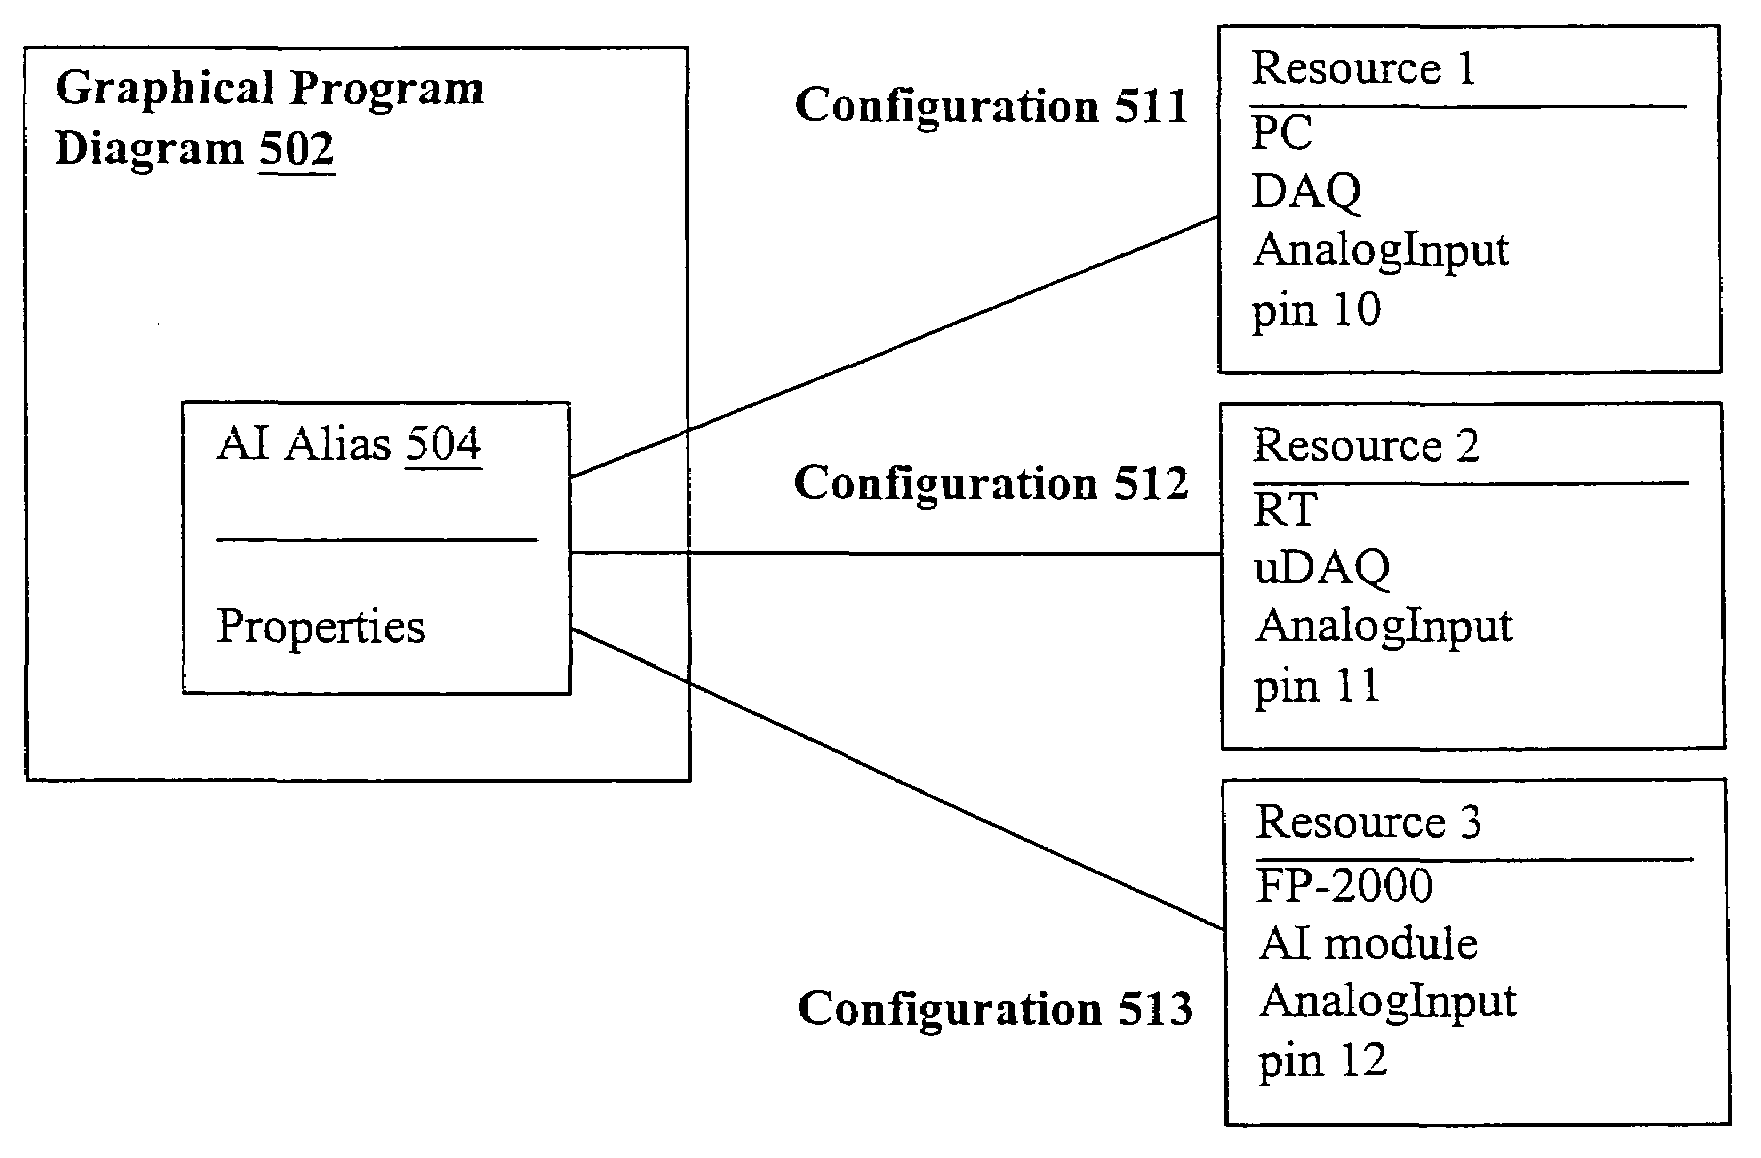 Graphical program which includes an I/O node for hardware abstraction